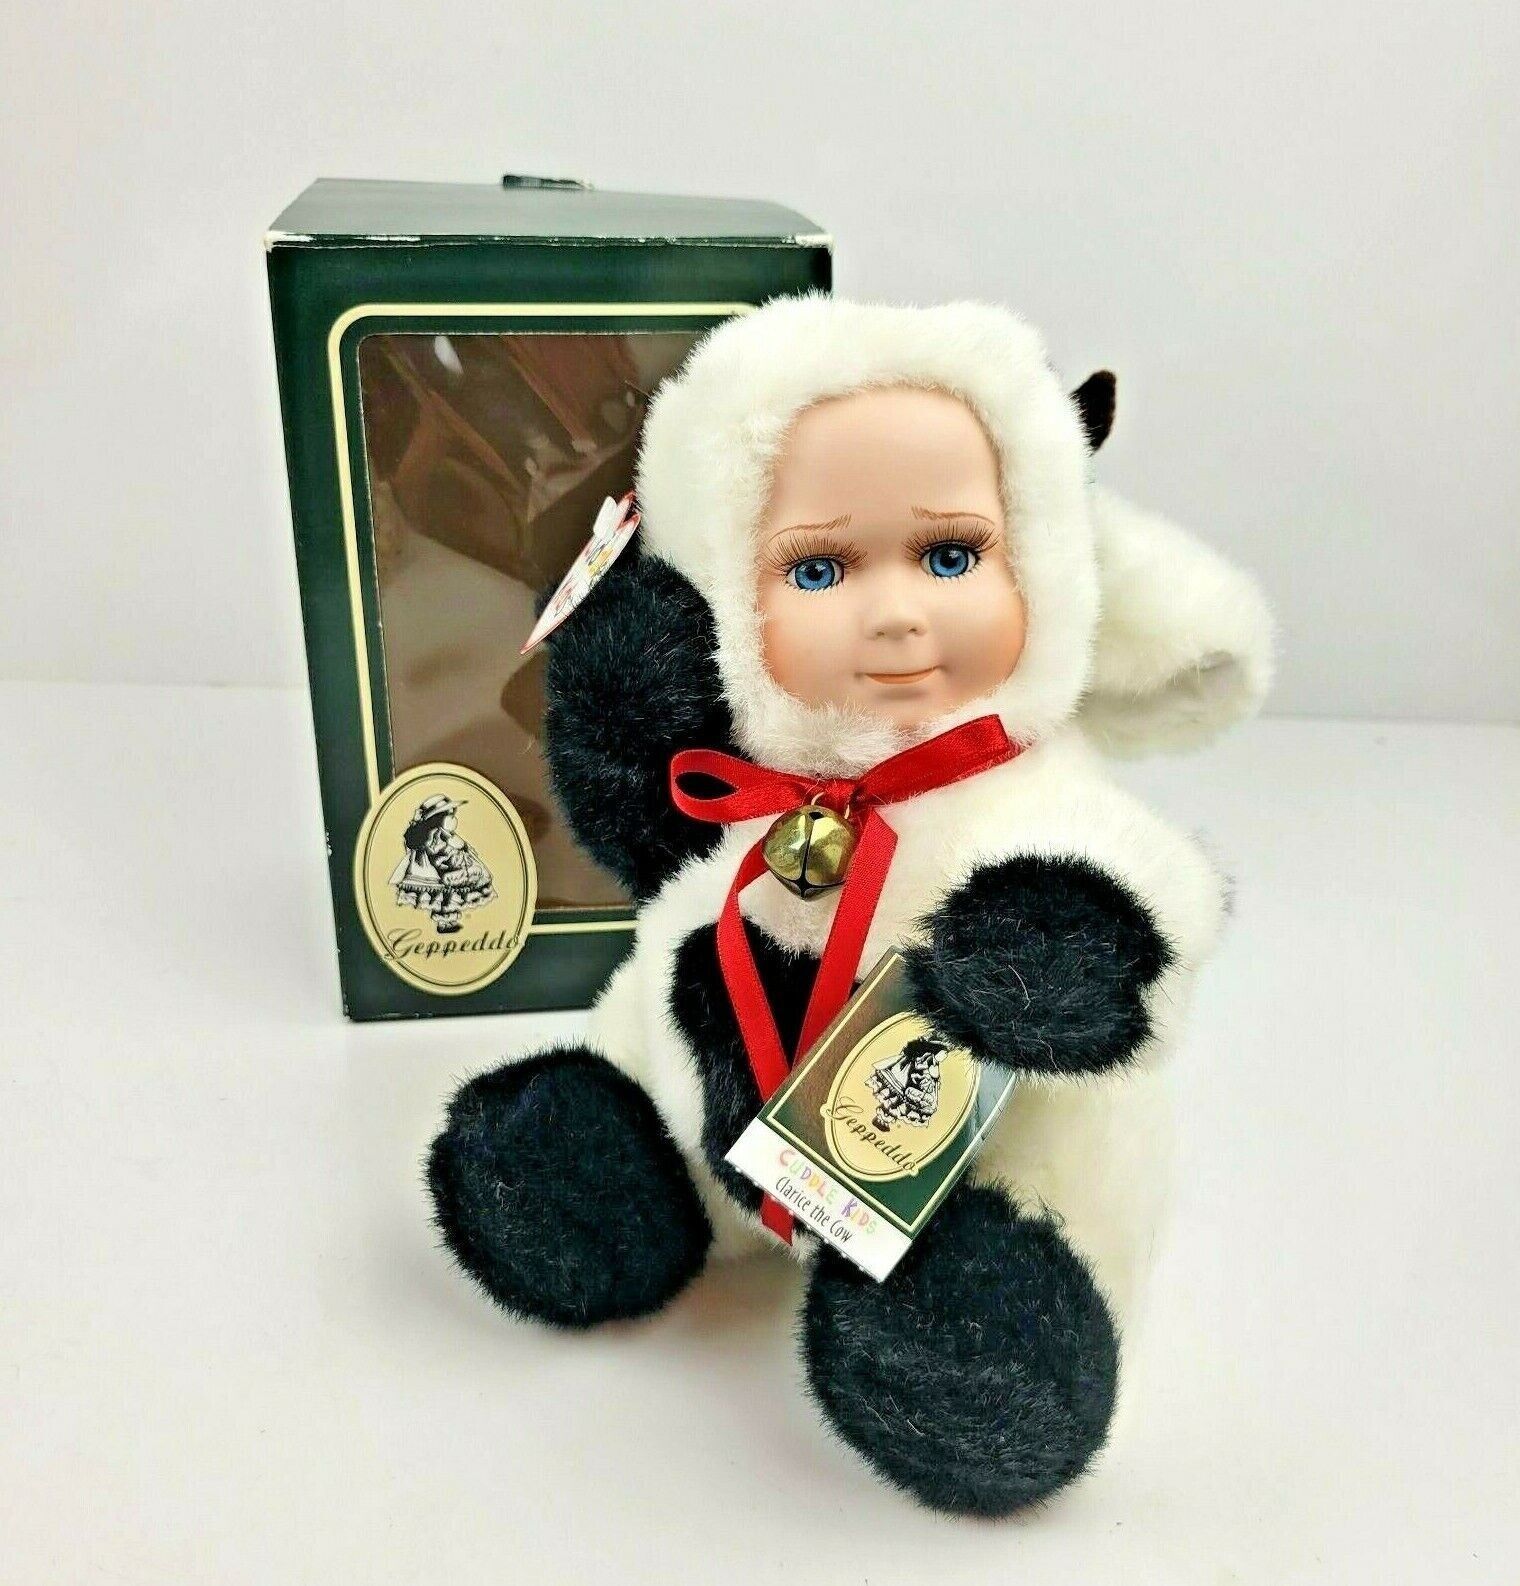 Geppeddo Cuddle Kids CLARICE THE COW Baby Doll Plush Porcelain Face w/ Box 2001 - $22.99